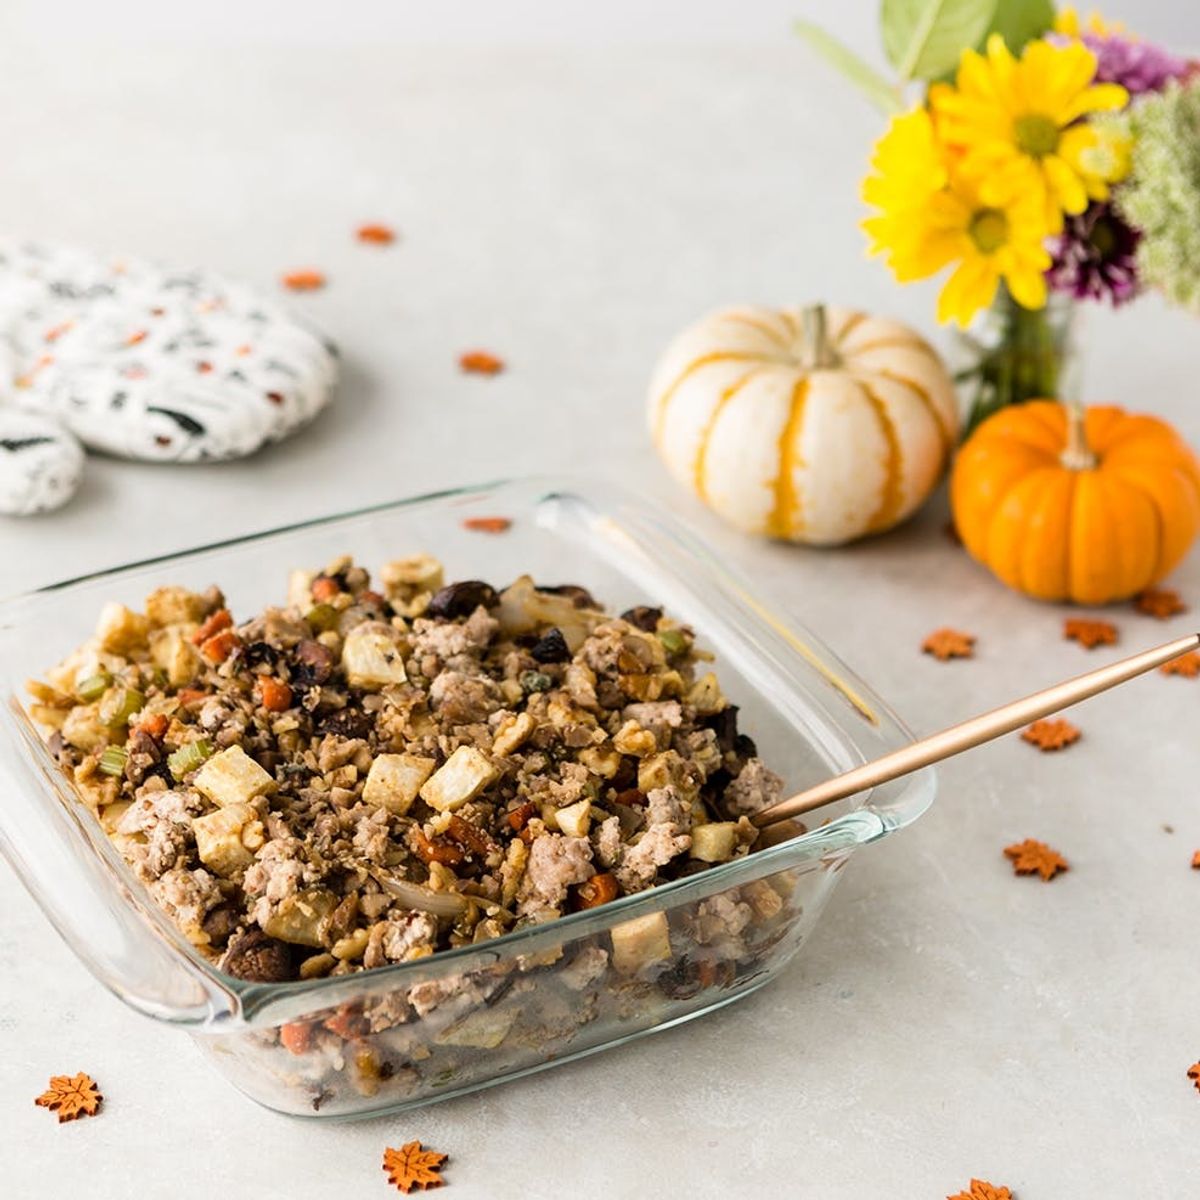 We Gave This Thanksgiving Stuffing Recipe a Paleo-Friendly Makeover That Everyone Will Love